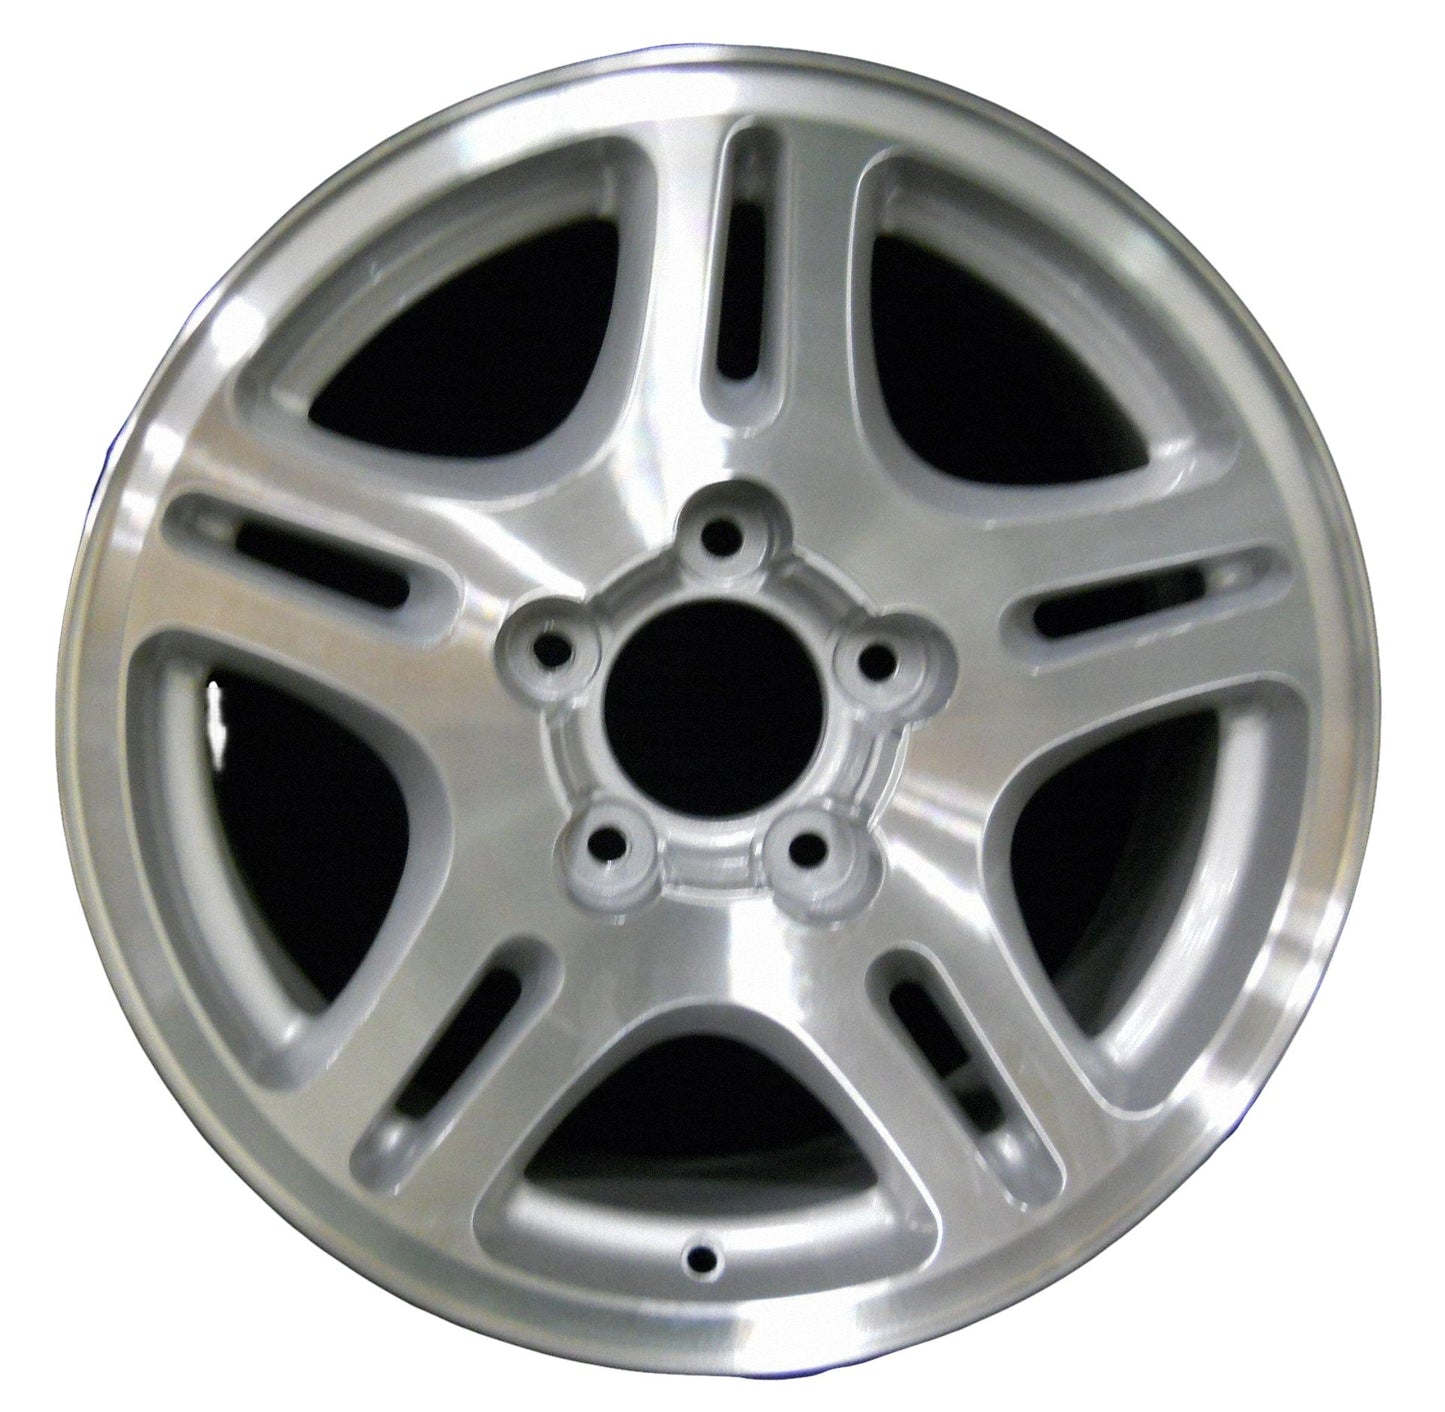 Ford Expedition  2000, 2001, 2002 Factory OEM Car Wheel Size 17x7.5 Alloy WAO.3467.PS02.MA